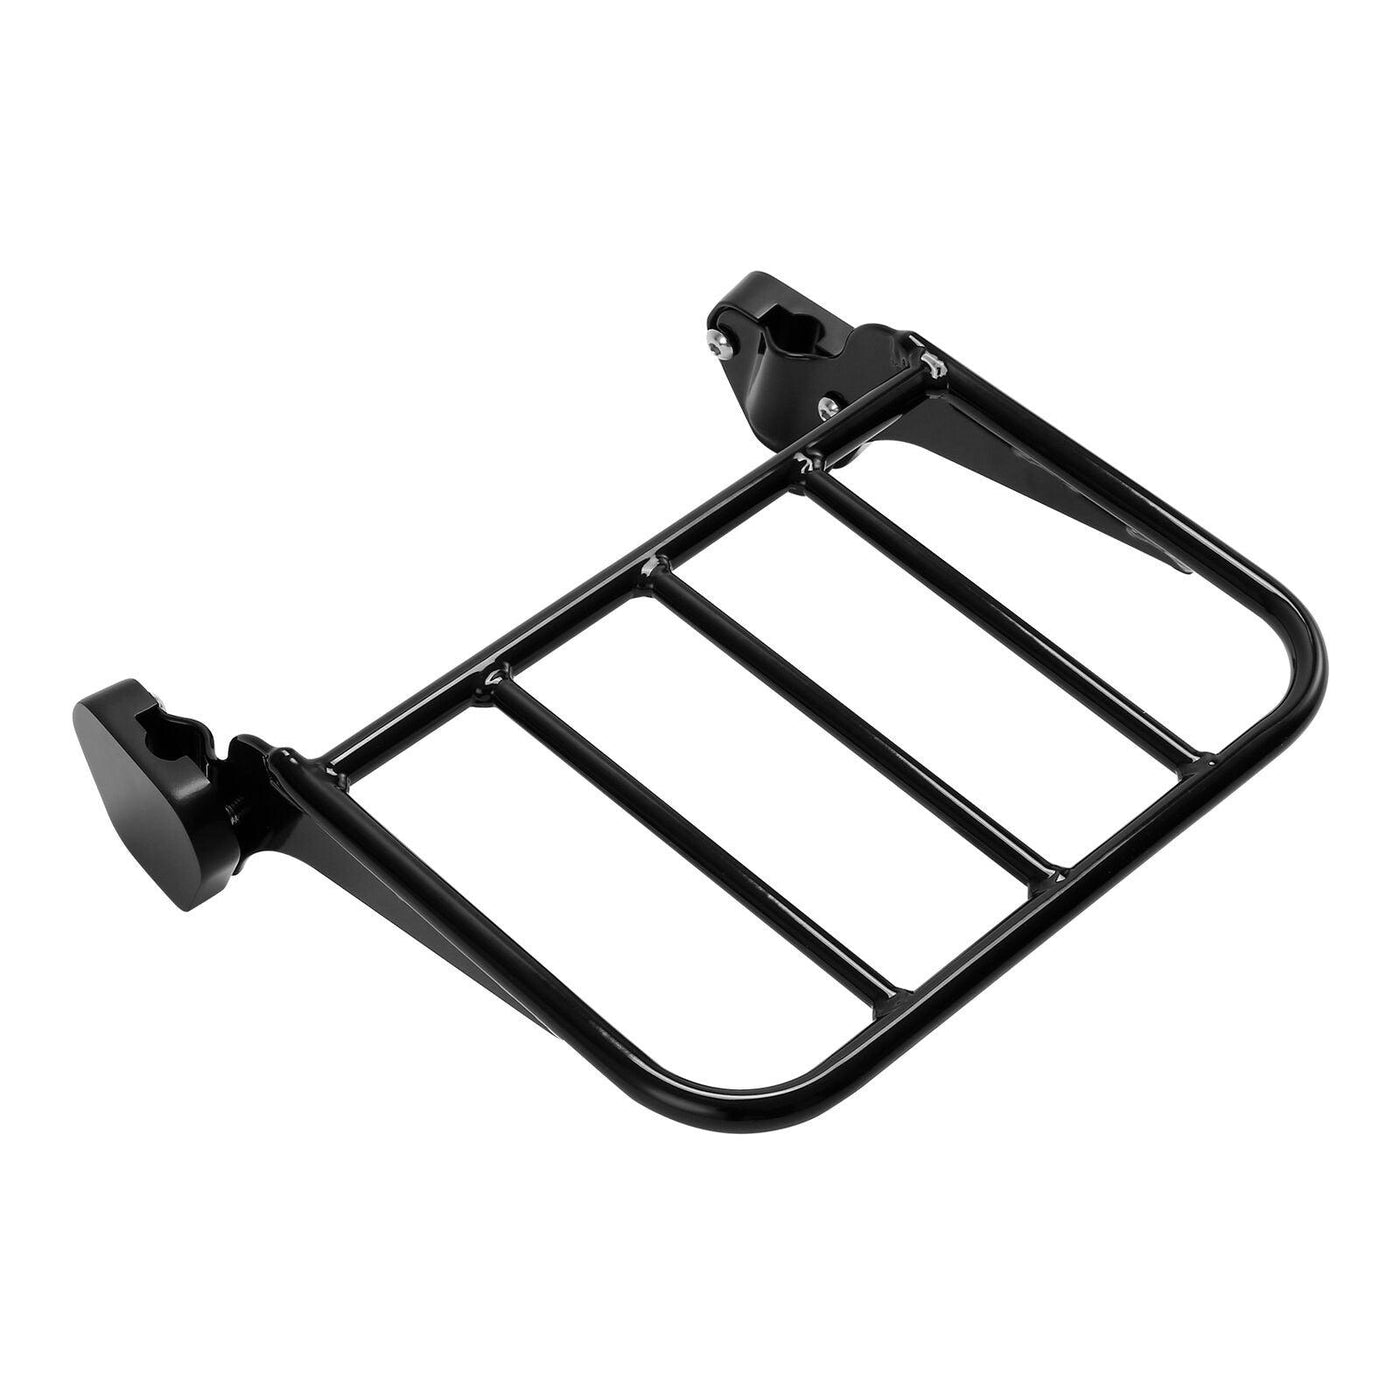 Luggage Rack Fit For Harley Touring Electra Street Road Glide 97-08 06 07 Black - Moto Life Products